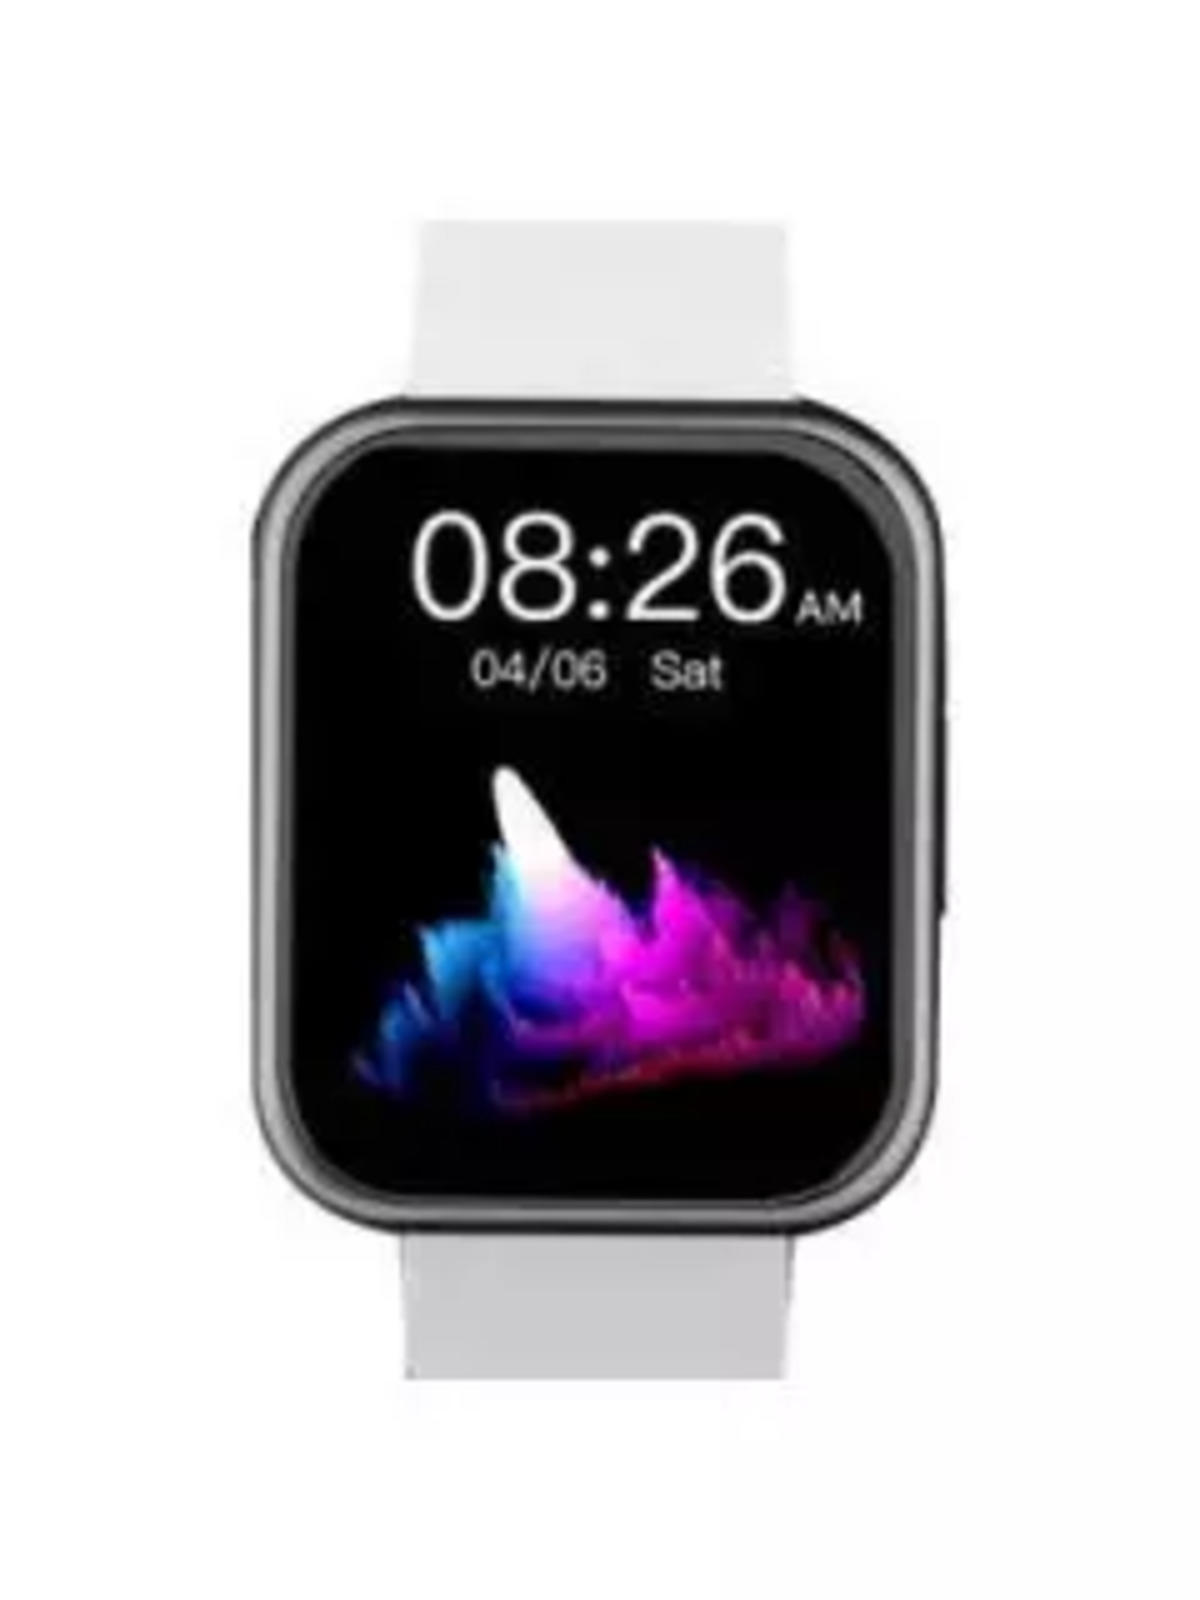 How To Set Own Pic As Wallpaper In Noise Smart Watch  Noise ColorFit Plus  Wallpaper Setting  YouTube